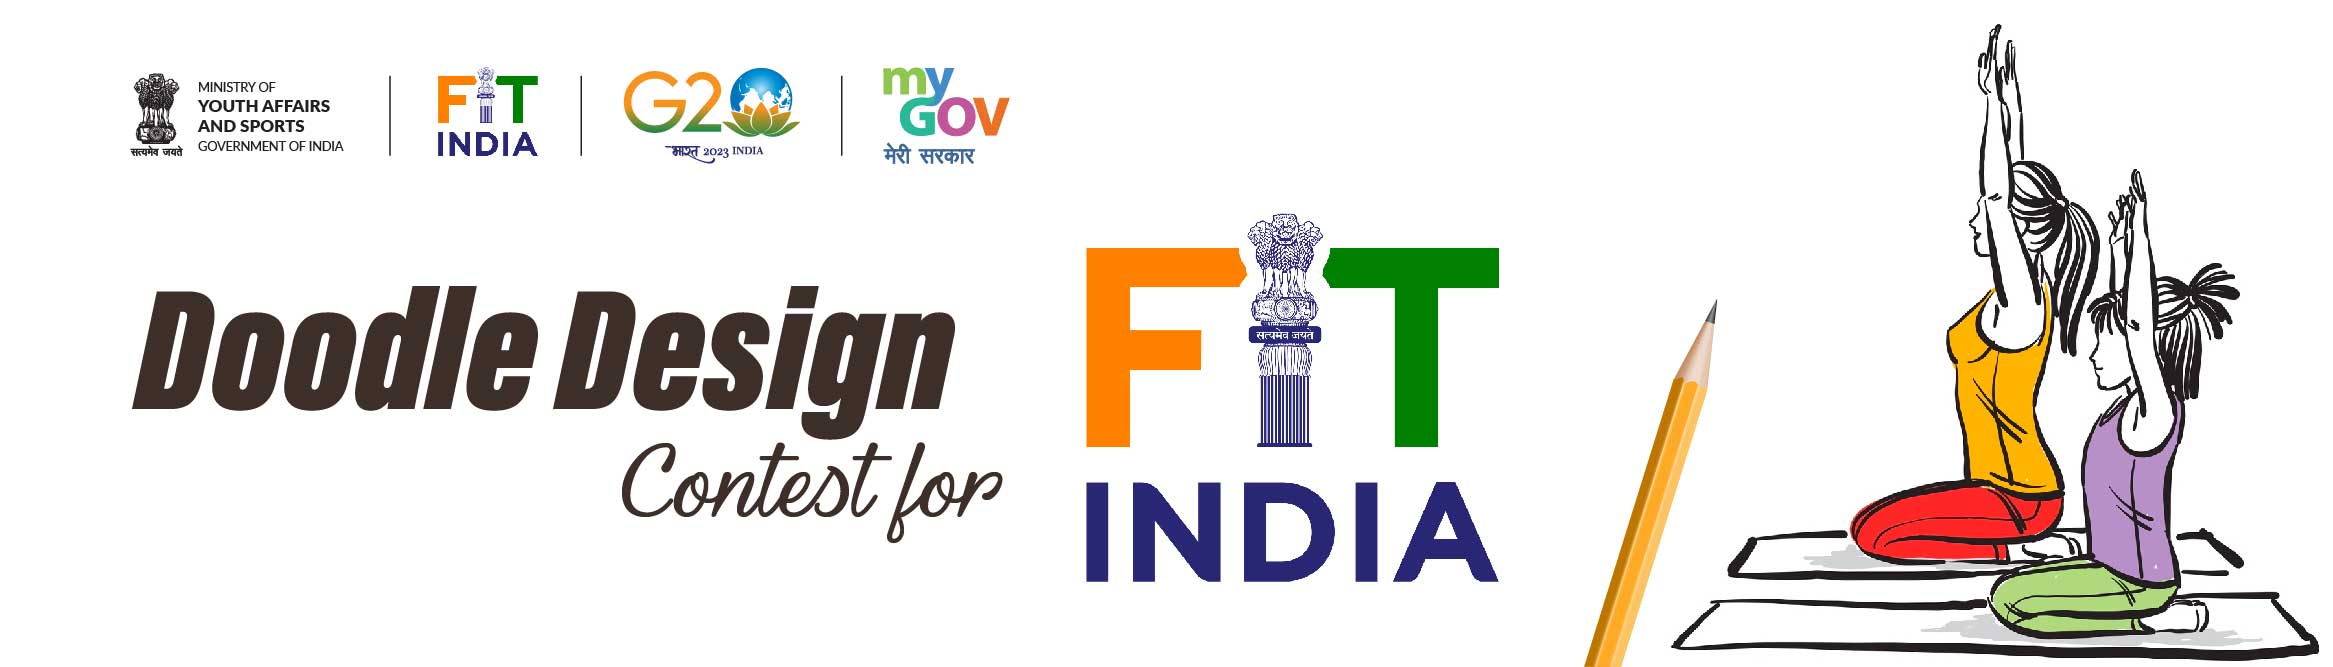 Doodle Design Contest for Fit India